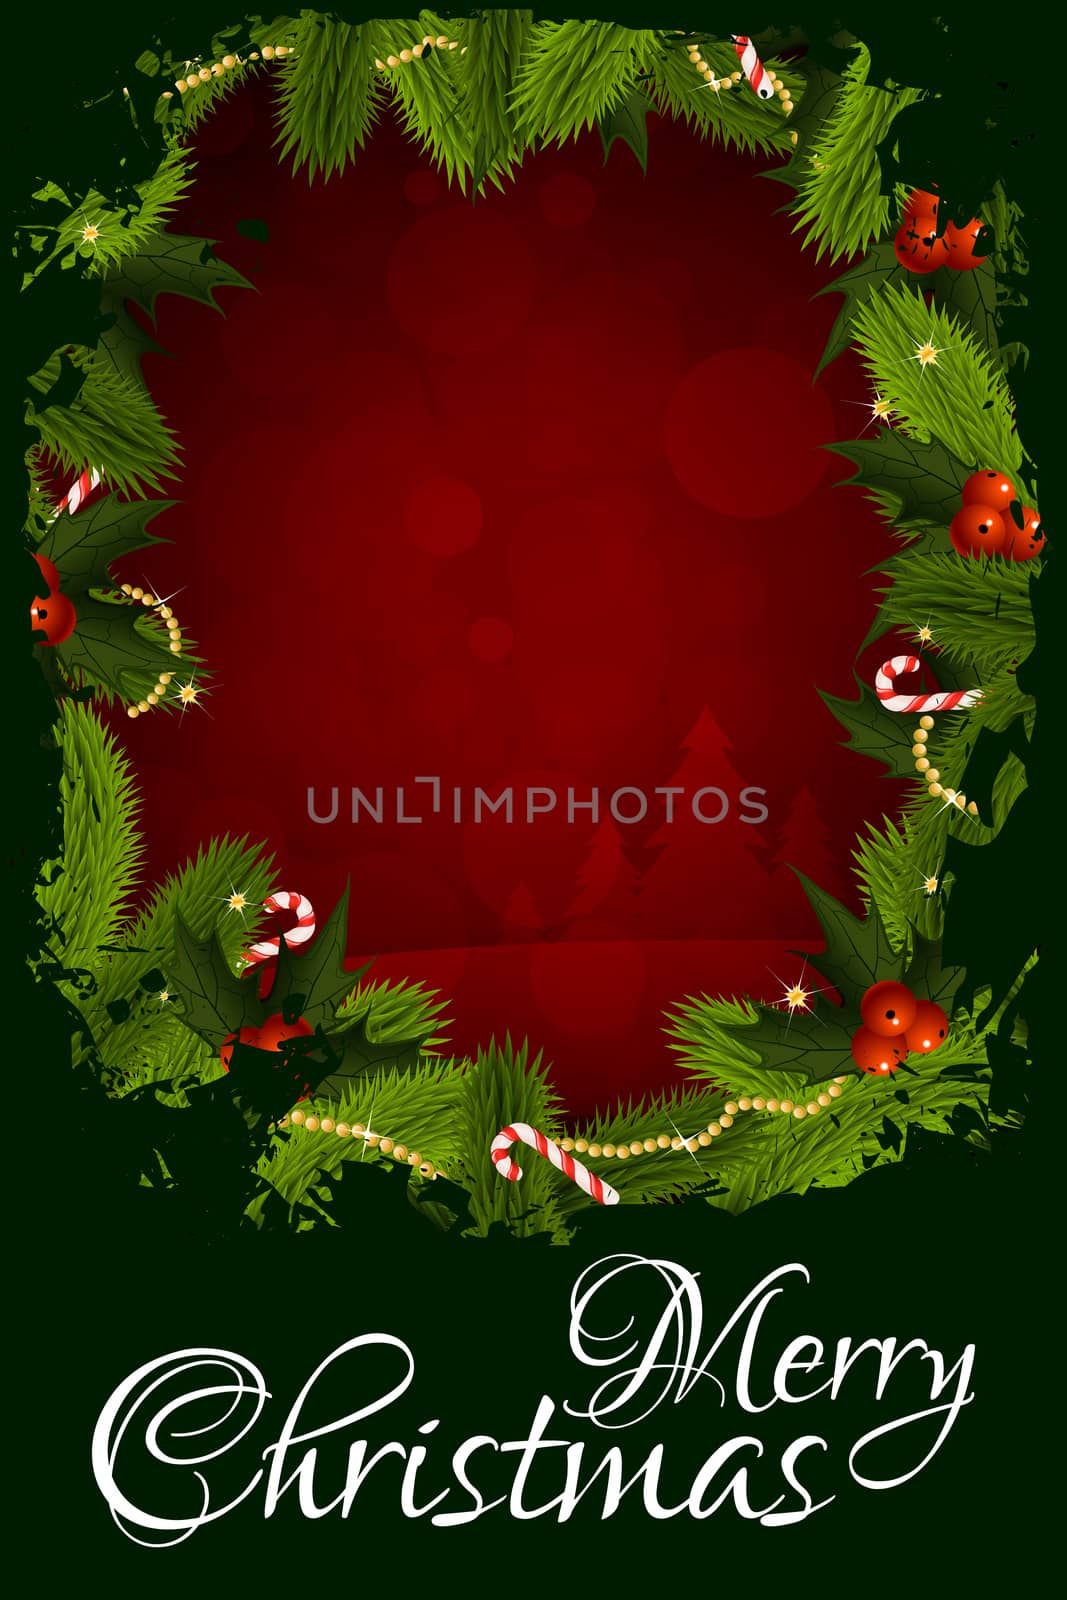 Merry Christmas Greeting Card with Christmas Decorations